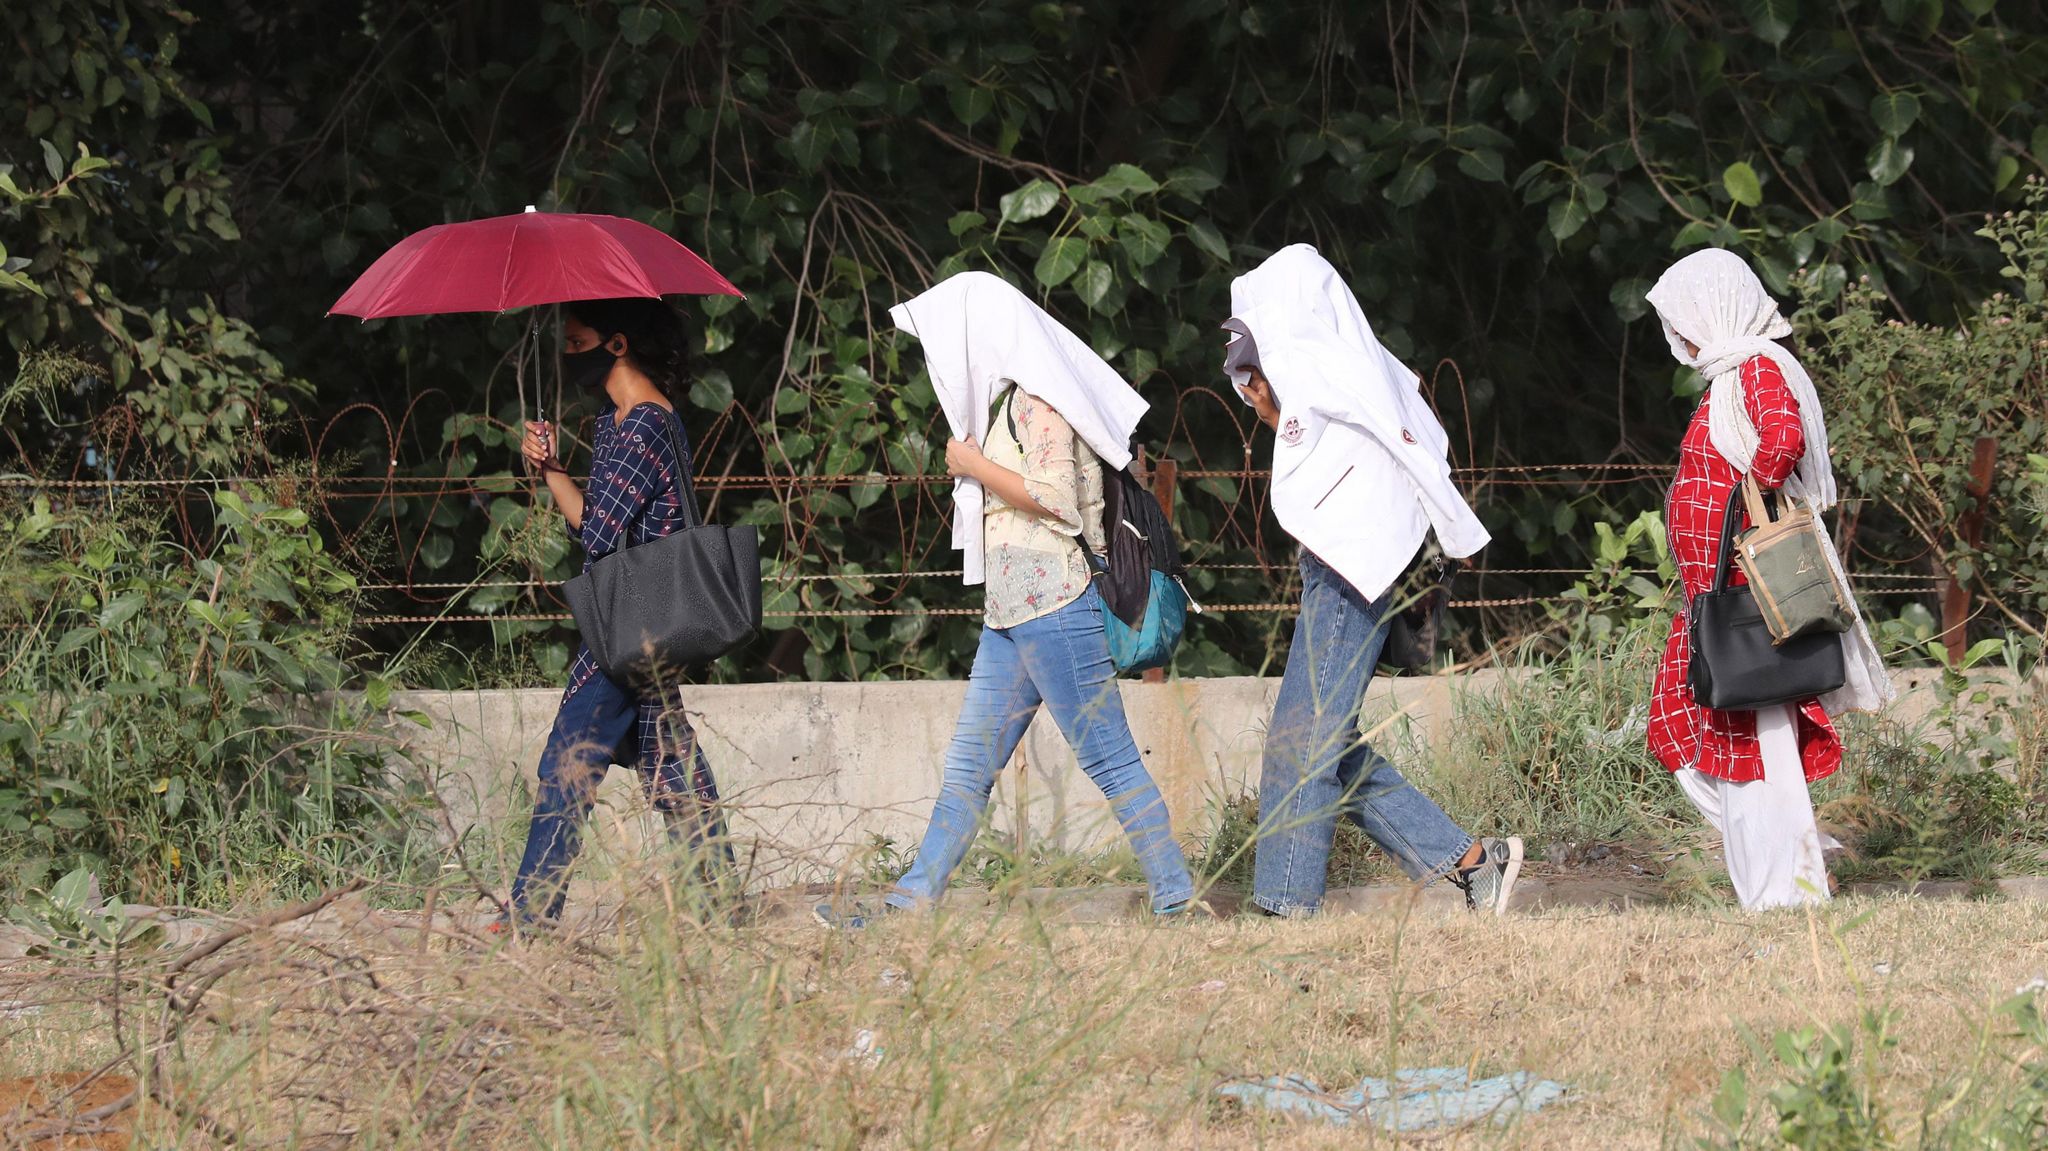 Indian girls use their white jackets and umbrella to protect themselves from the sun during a heatwave near New Delhi, India, 22 May 2023. India Meteorological Department issued a heat wave warning after several parts of the Indian capital recorded maximum temperatures above 45 degrees Celsius. Heatwave warning issued for several parts of India, New Delhi - 22 May 2023